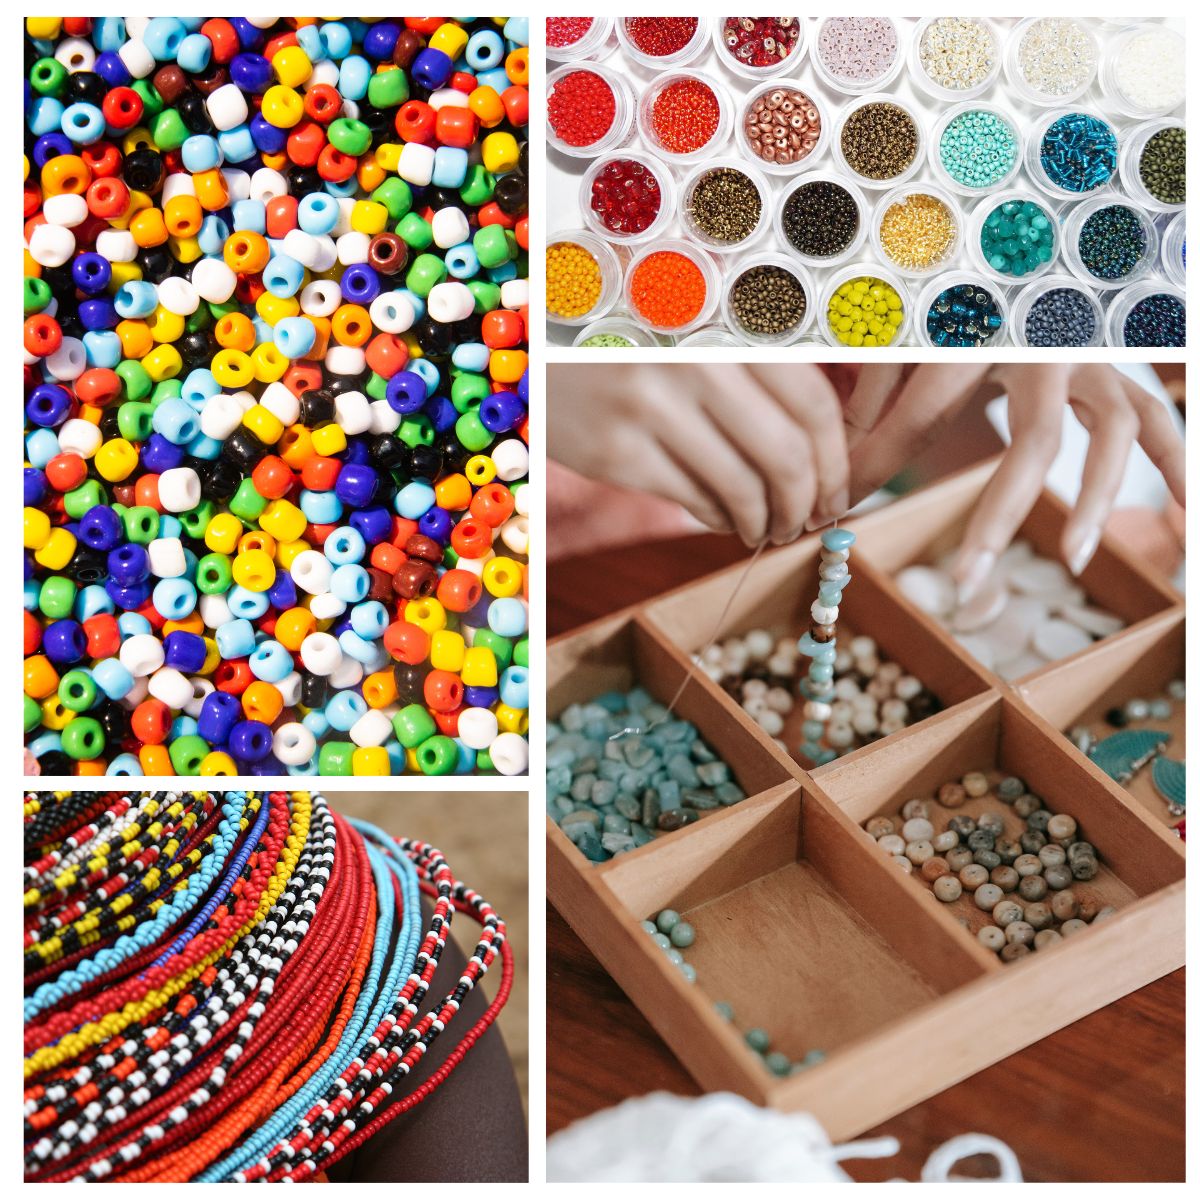 15 Fun DIY Bead Projects That You Can Make In An Afternoon - DIY & Crafts